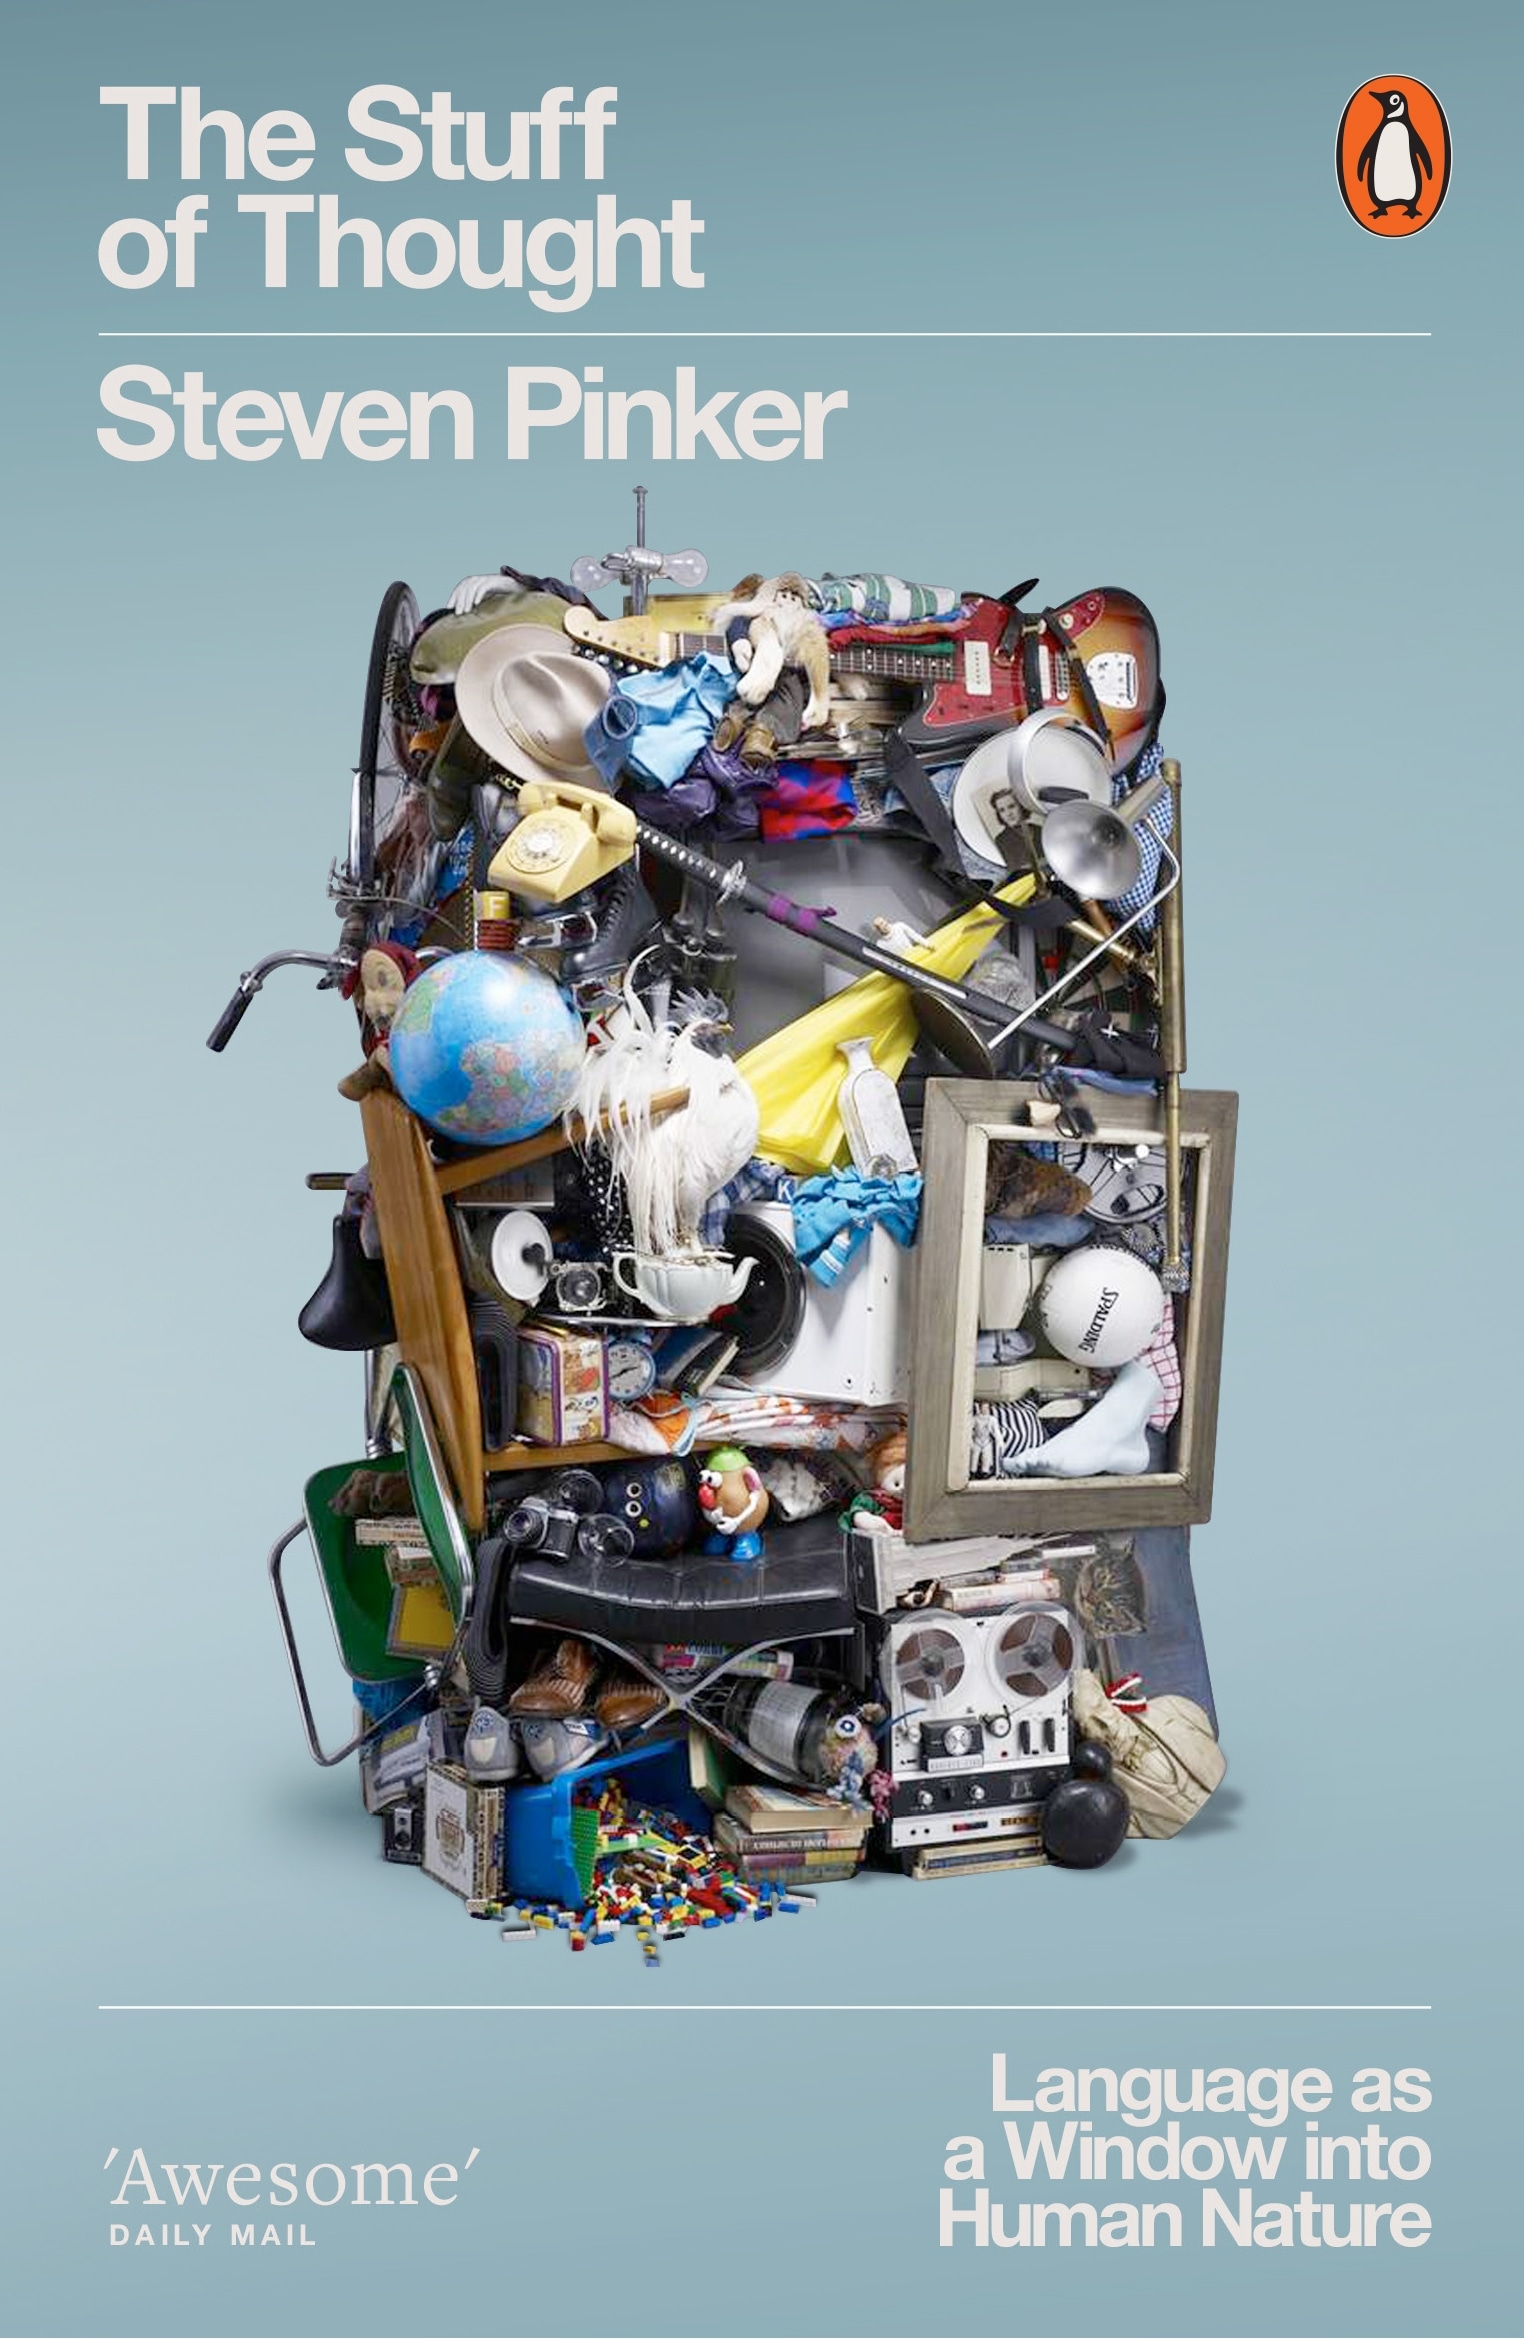 Book “The Stuff of Thought” by Steven Pinker — June 5, 2008